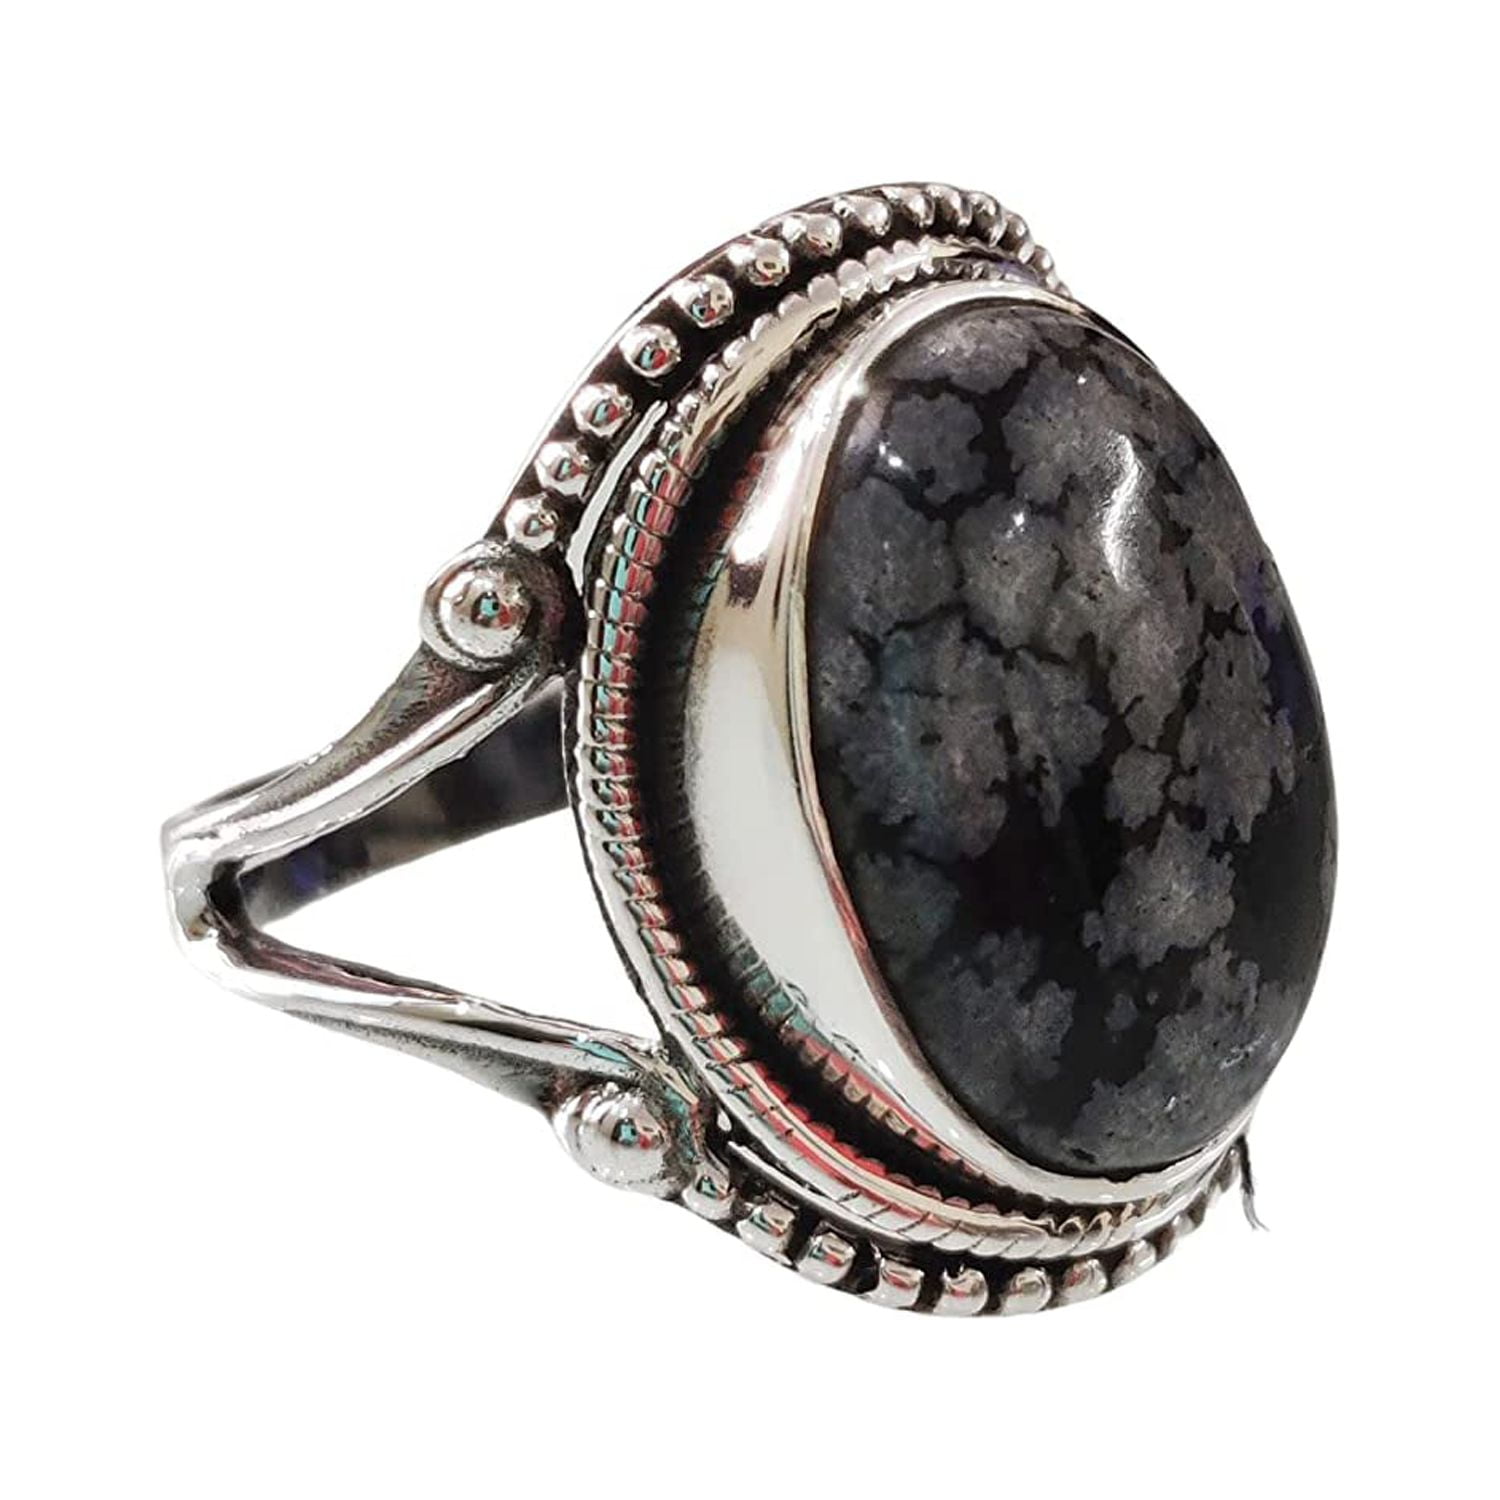 1pcs/lot natural stone obsidian ring men's low-key luxury texture  adjustable S925 Sterling Silver black jewelry mystery collect